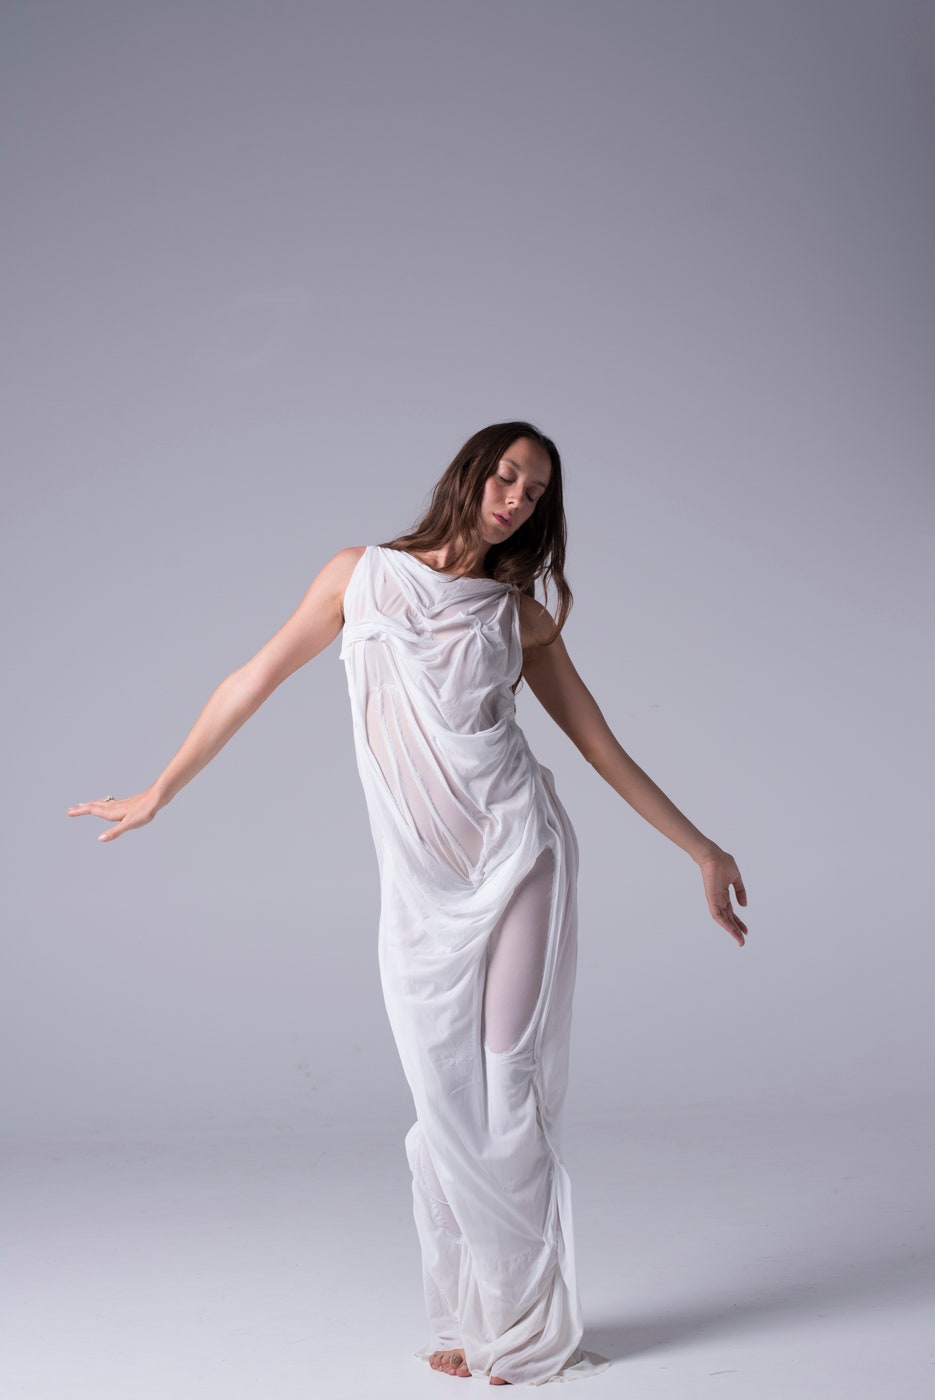 Image may contain Clothing Apparel Human Person Female Evening Dress Fashion Gown Robe and Dance Pose